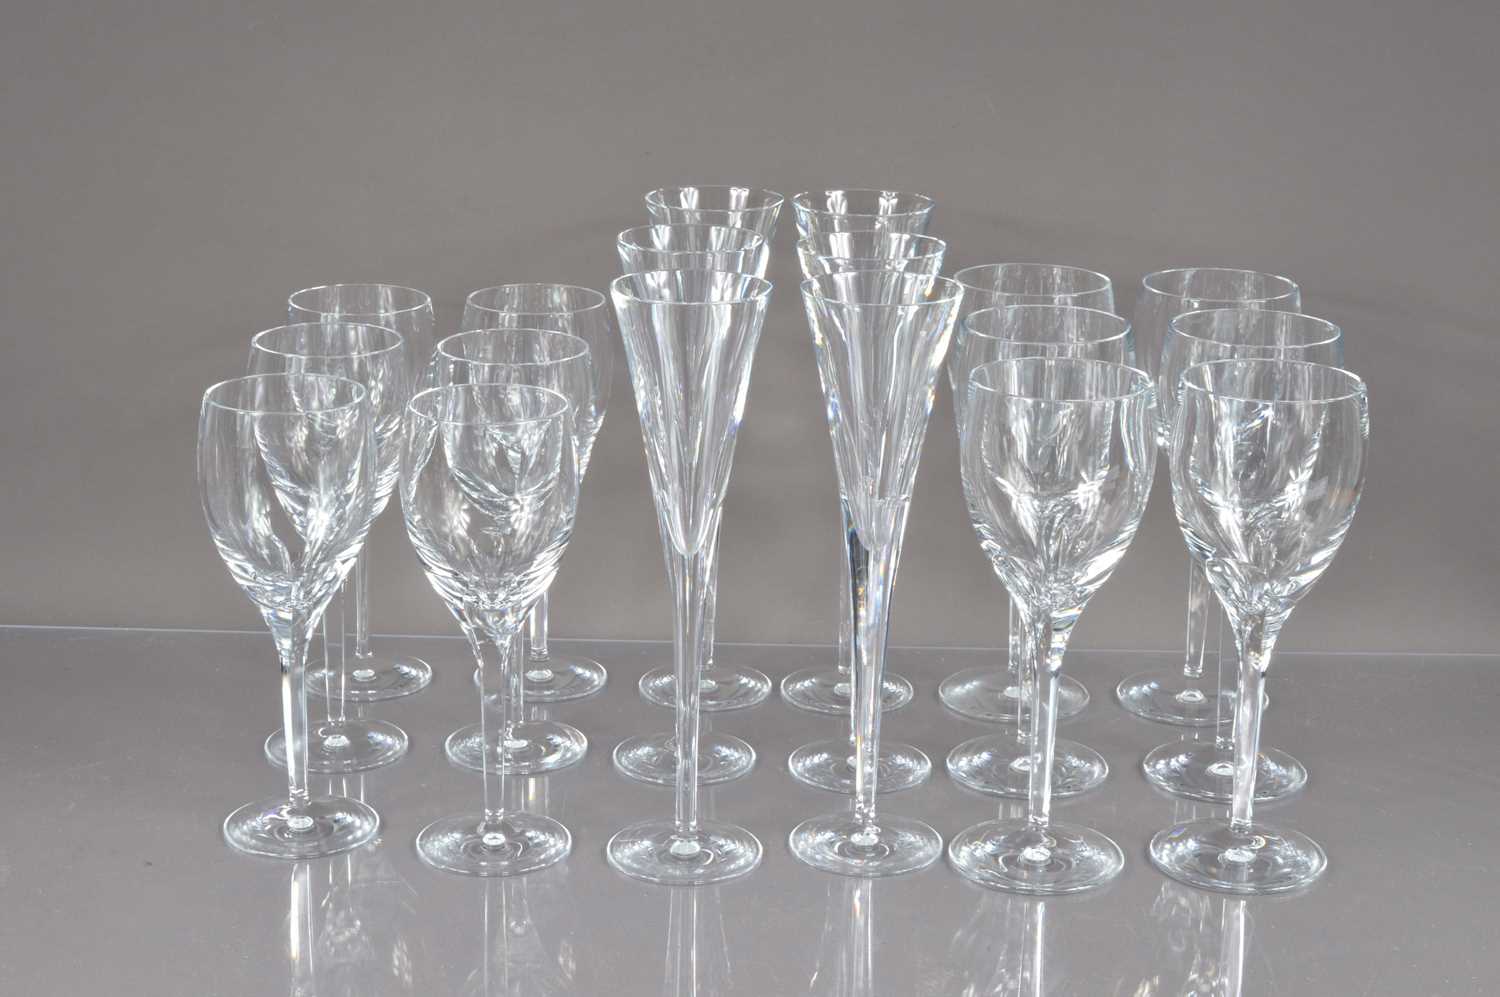 An elegant set of crystal glasses for six people by John Rocha for Waterford, - Image 2 of 4